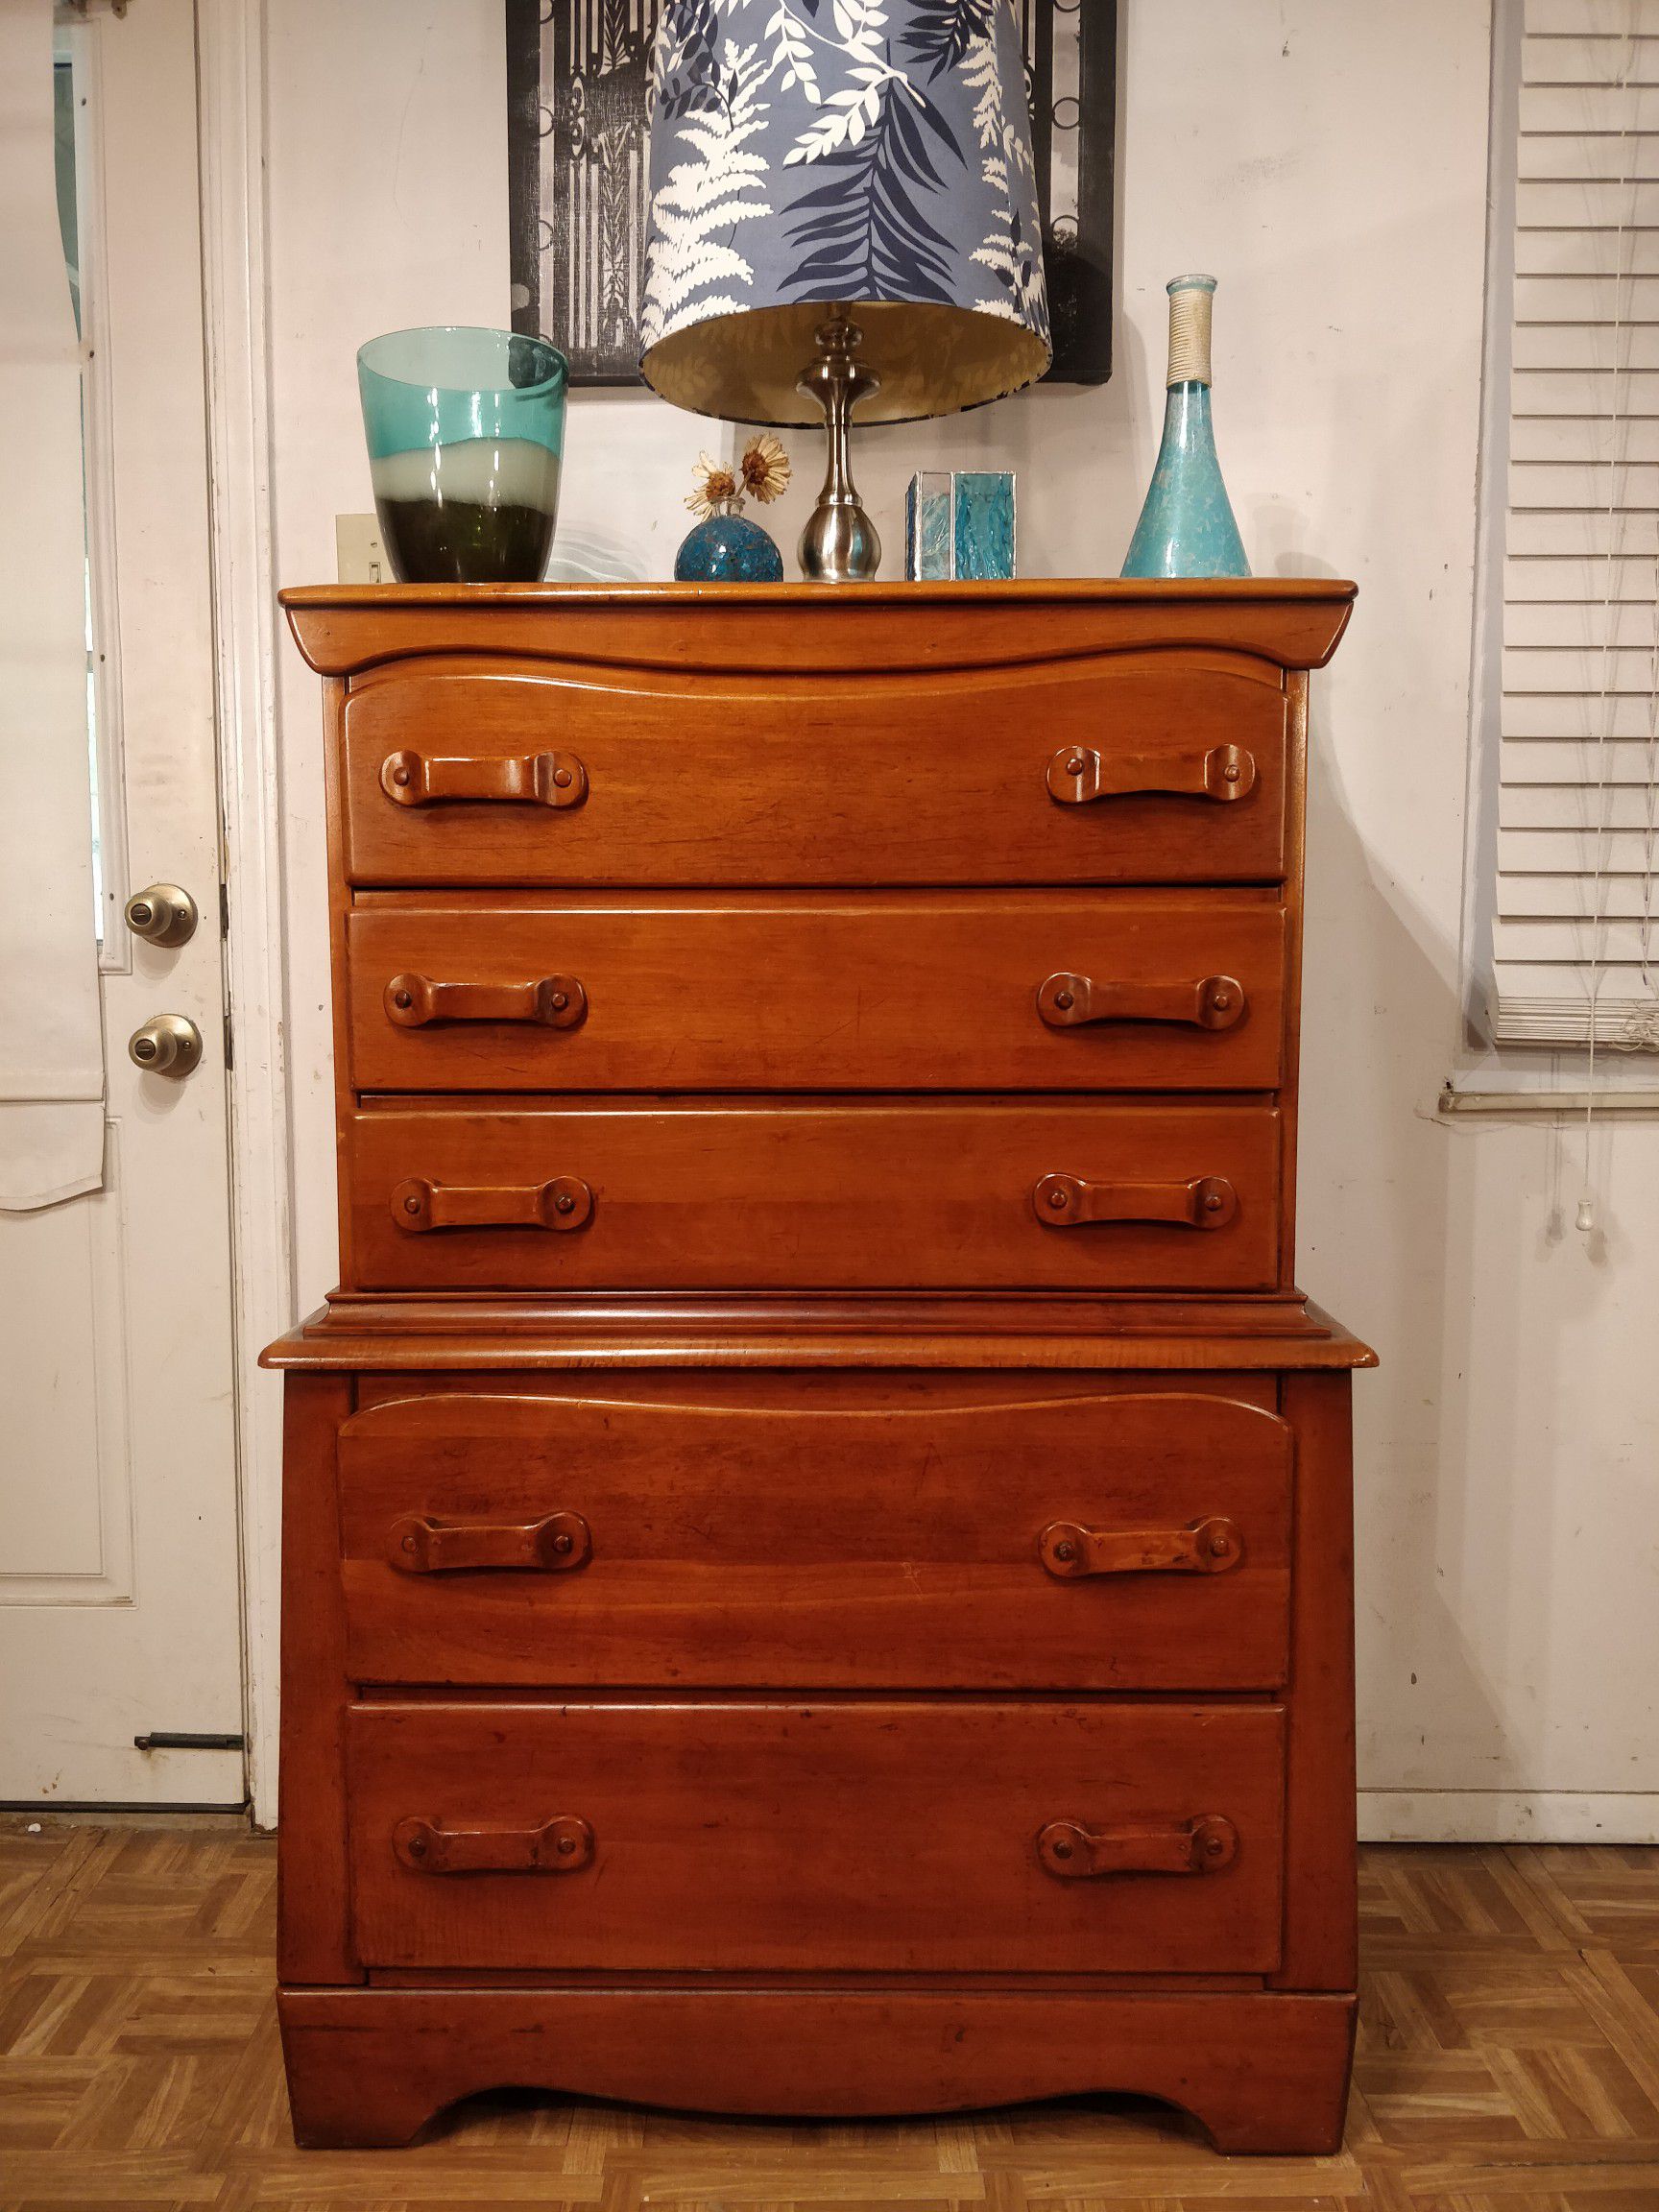 Solid wood chest dresser with big drawers in good condition all drawers working, dovetail drawers driveway pickup. L34"*W19"*H50"